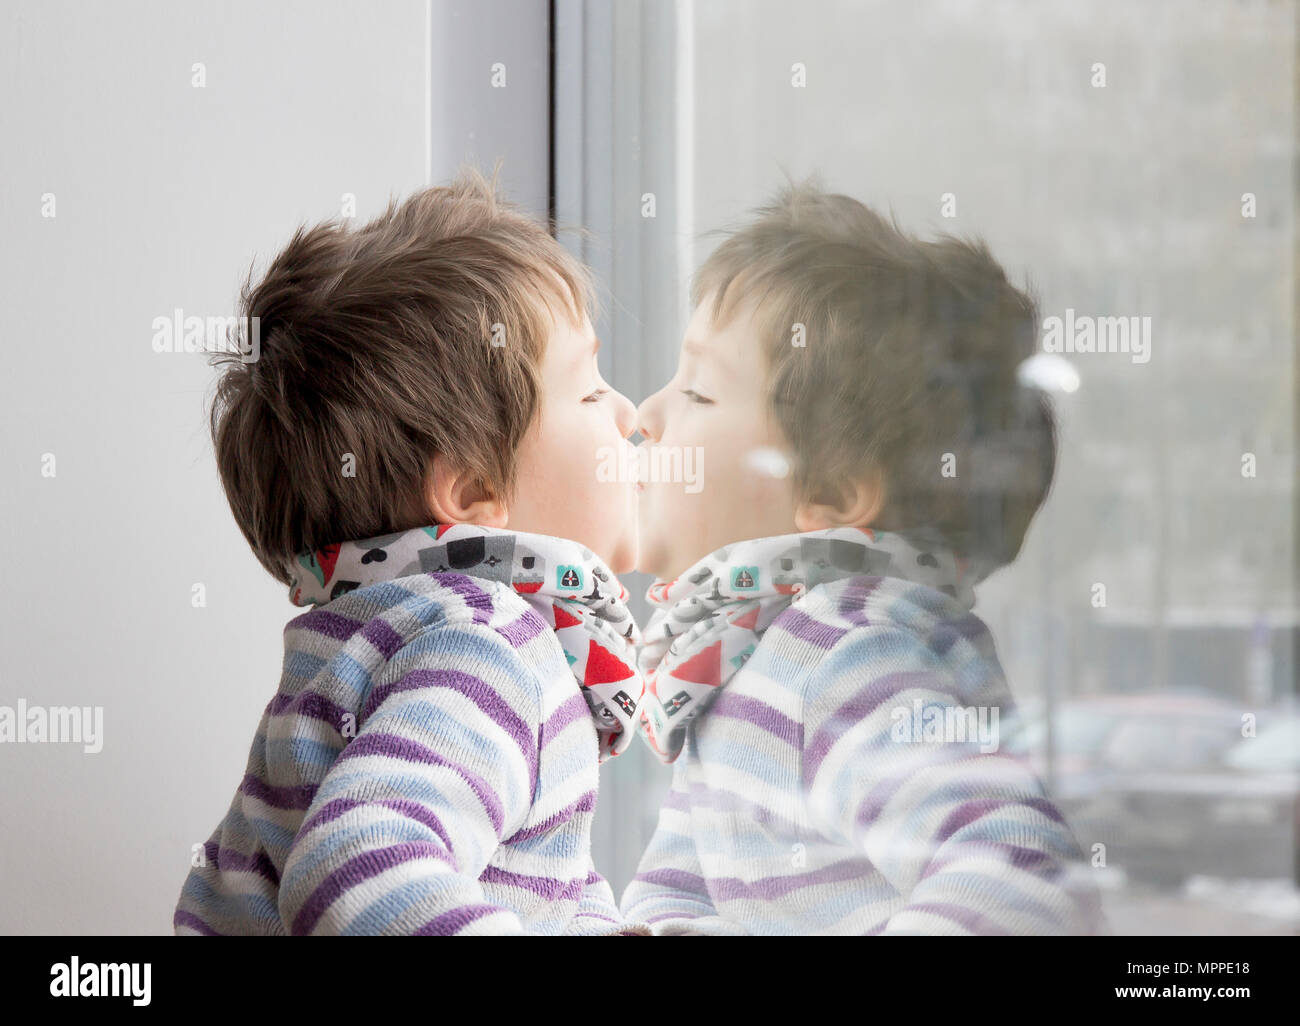 Little boy leaning face to window Stock Photo